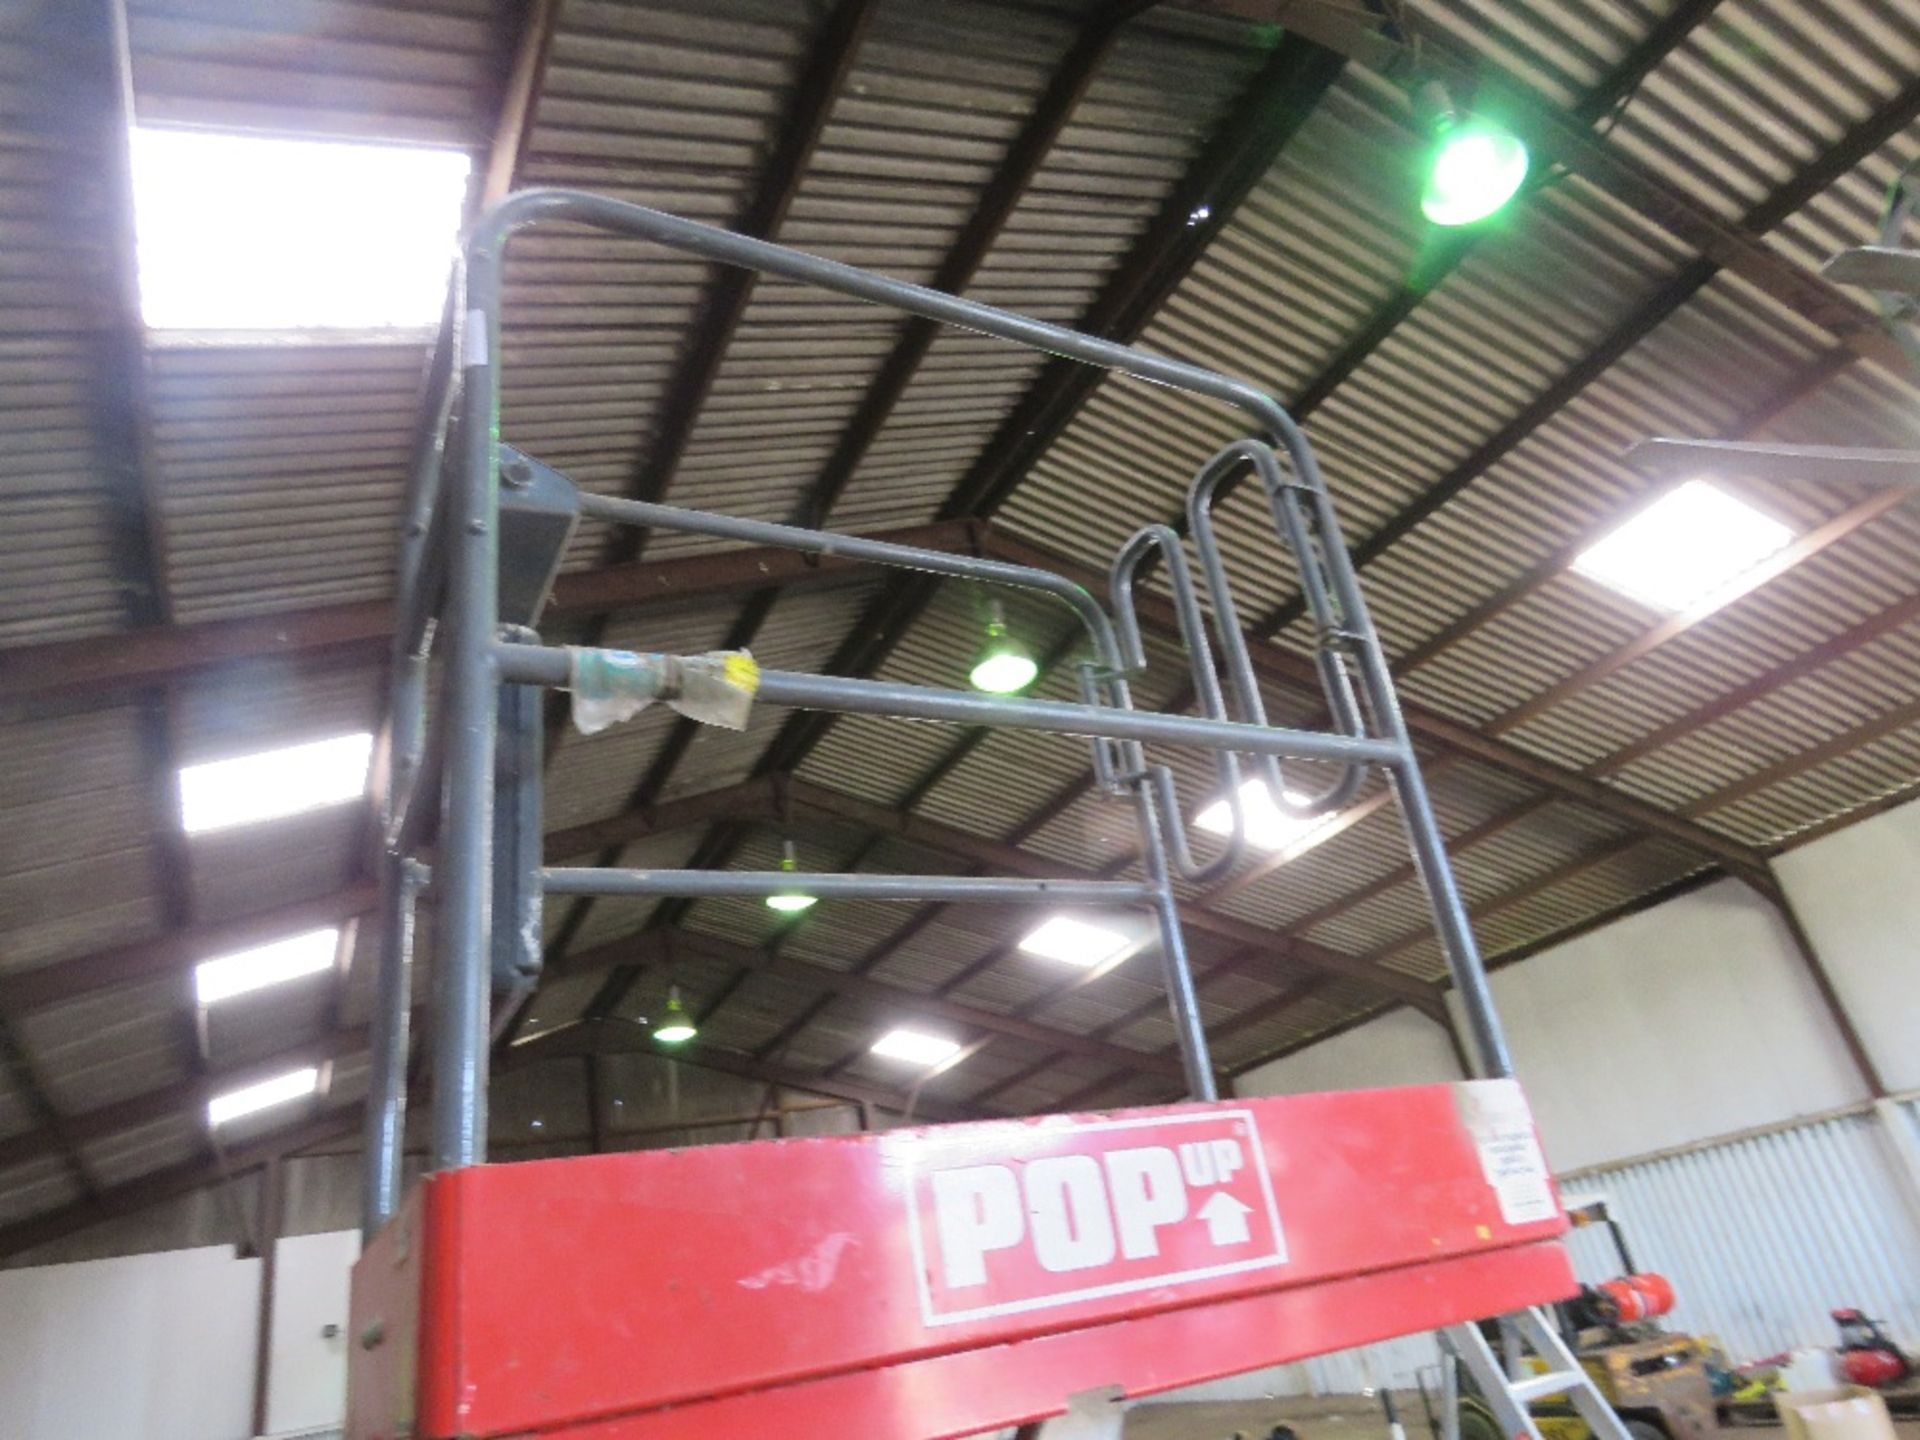 POPUP PUSH 6 PRO SCISSOR ACCESS LIFT. WHNE TESTED WAS SEEN TO LIFT AND LOWER. - Image 6 of 10